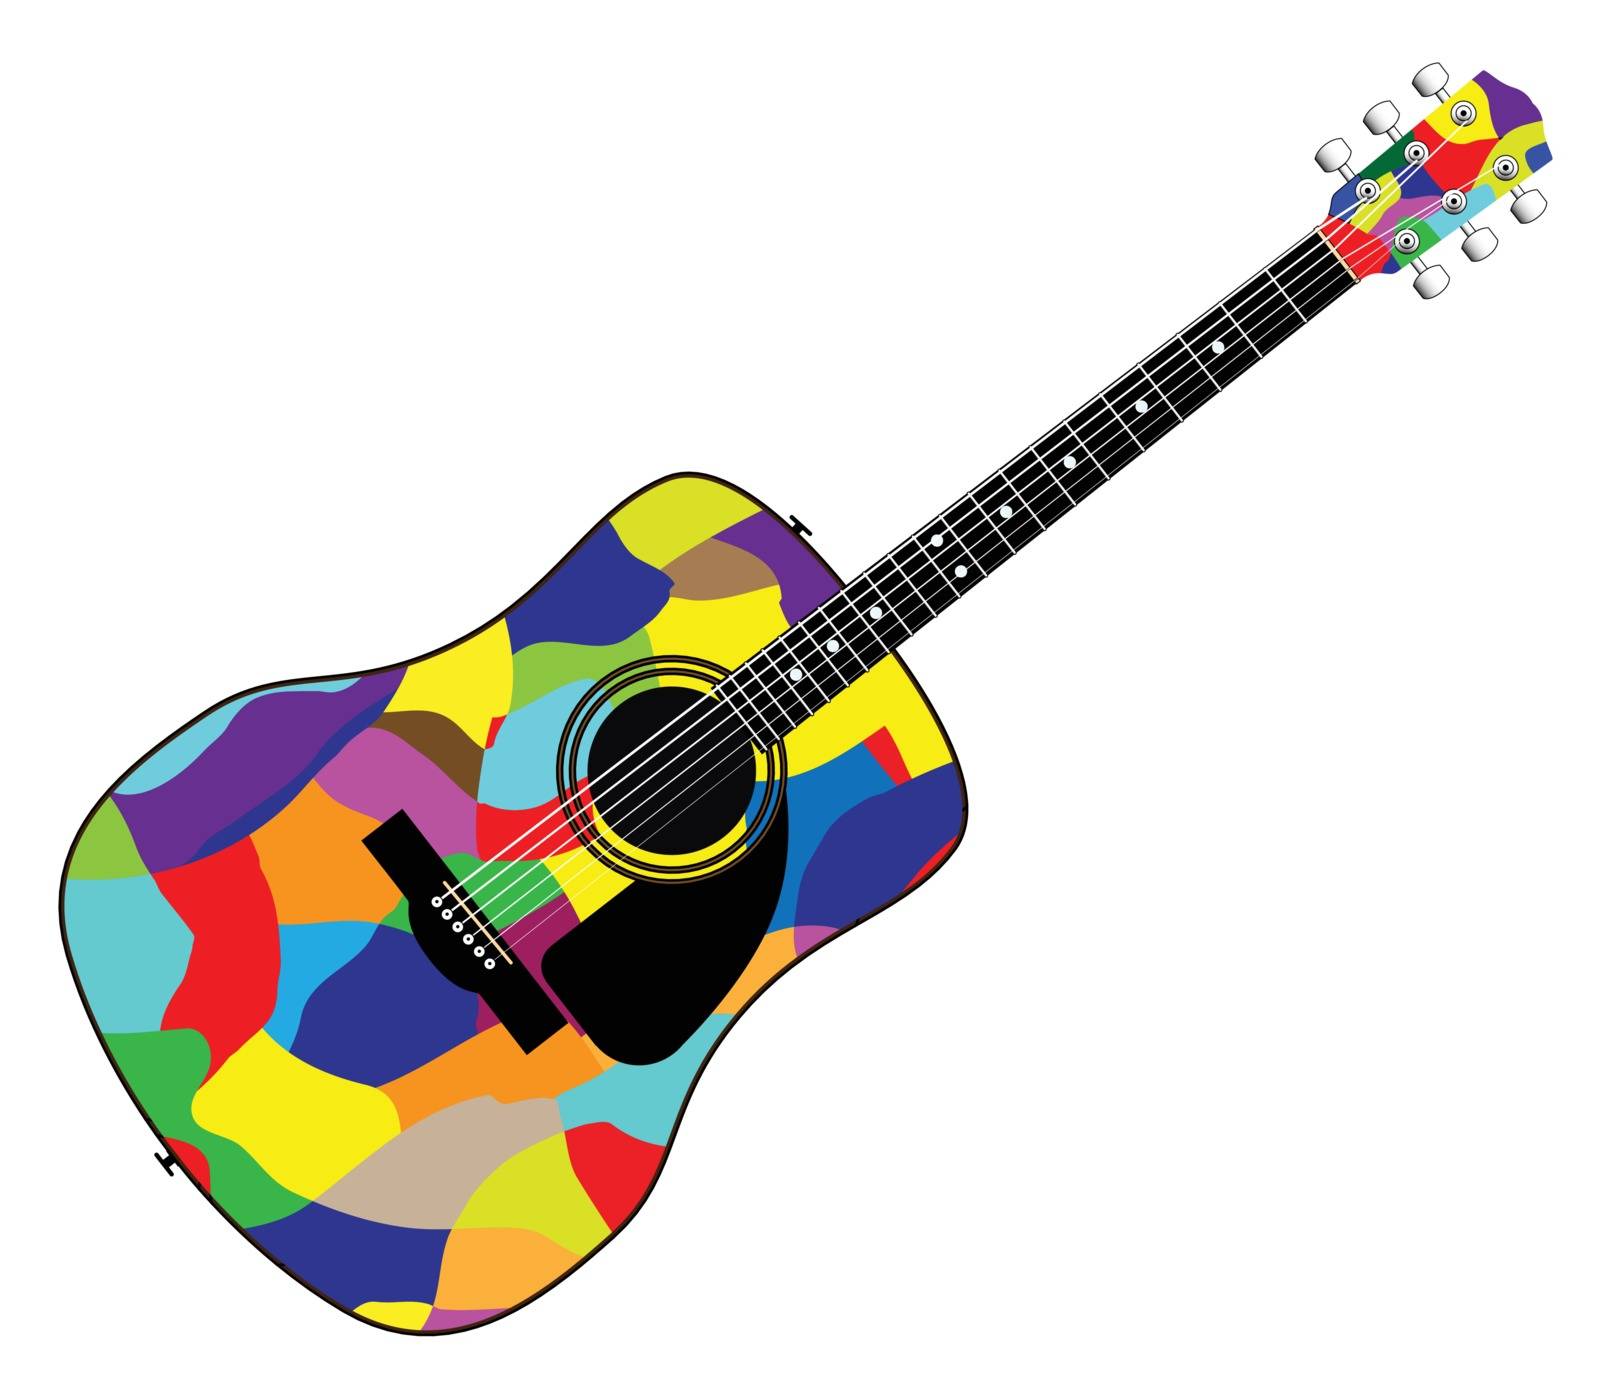 A typical acoustic guitar isolated over a white background.